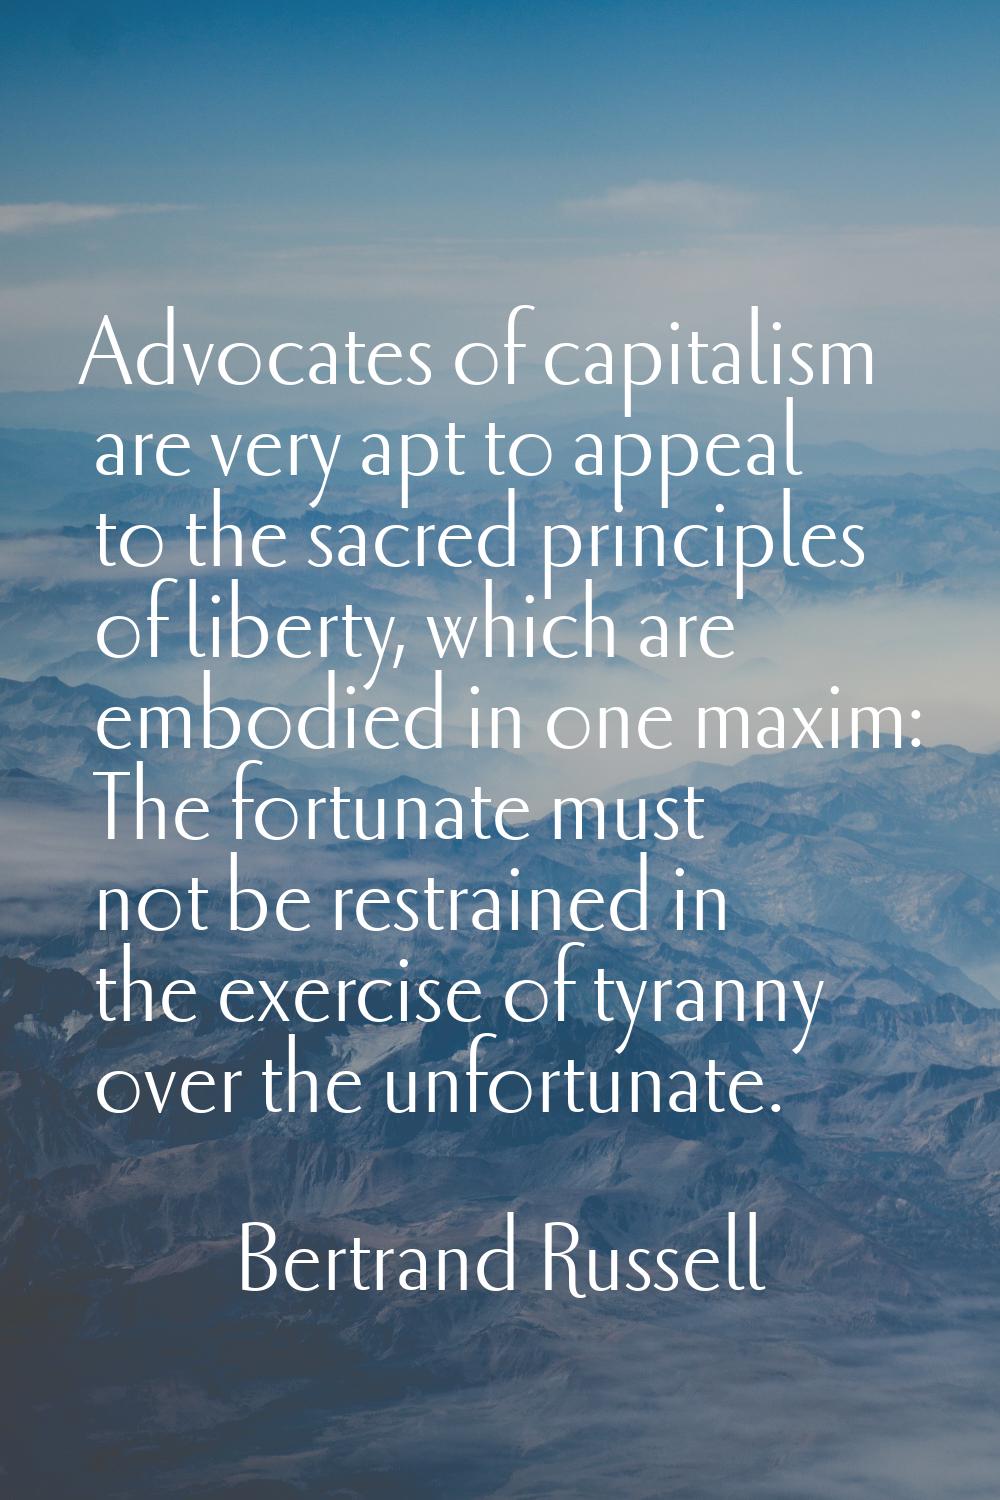 Advocates of capitalism are very apt to appeal to the sacred principles of liberty, which are embod